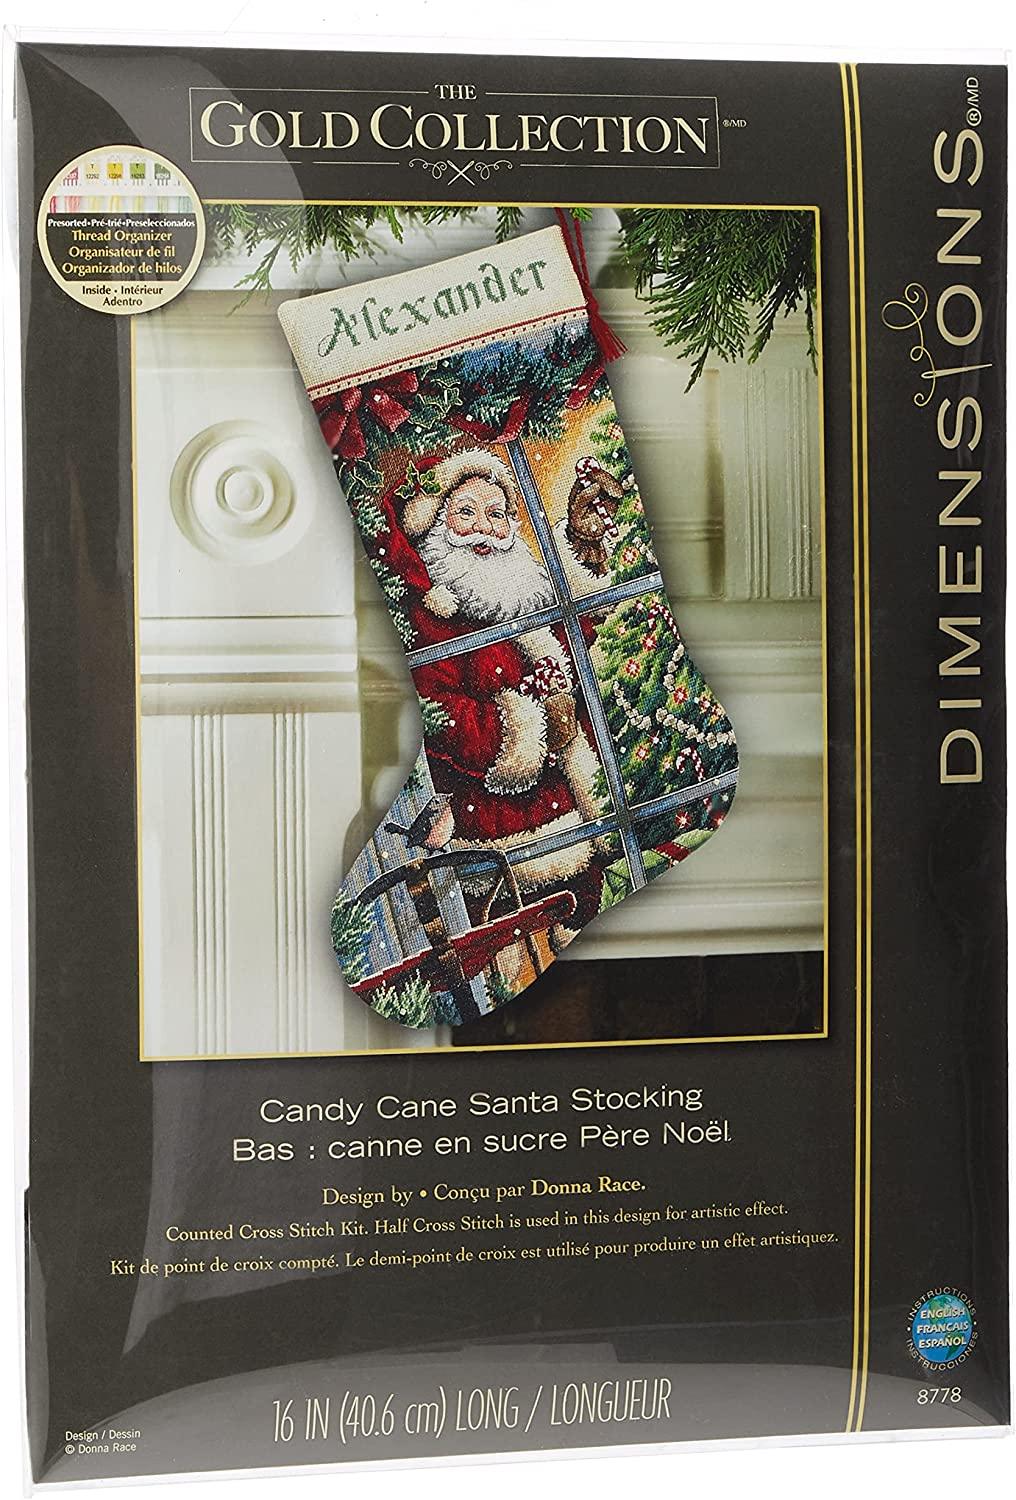 CANDY CANE SANTA STOKING, Counted Cross Stitch Kit, 16 count dove grey Aida, 41 cm long, DIMENSIONS (08778)